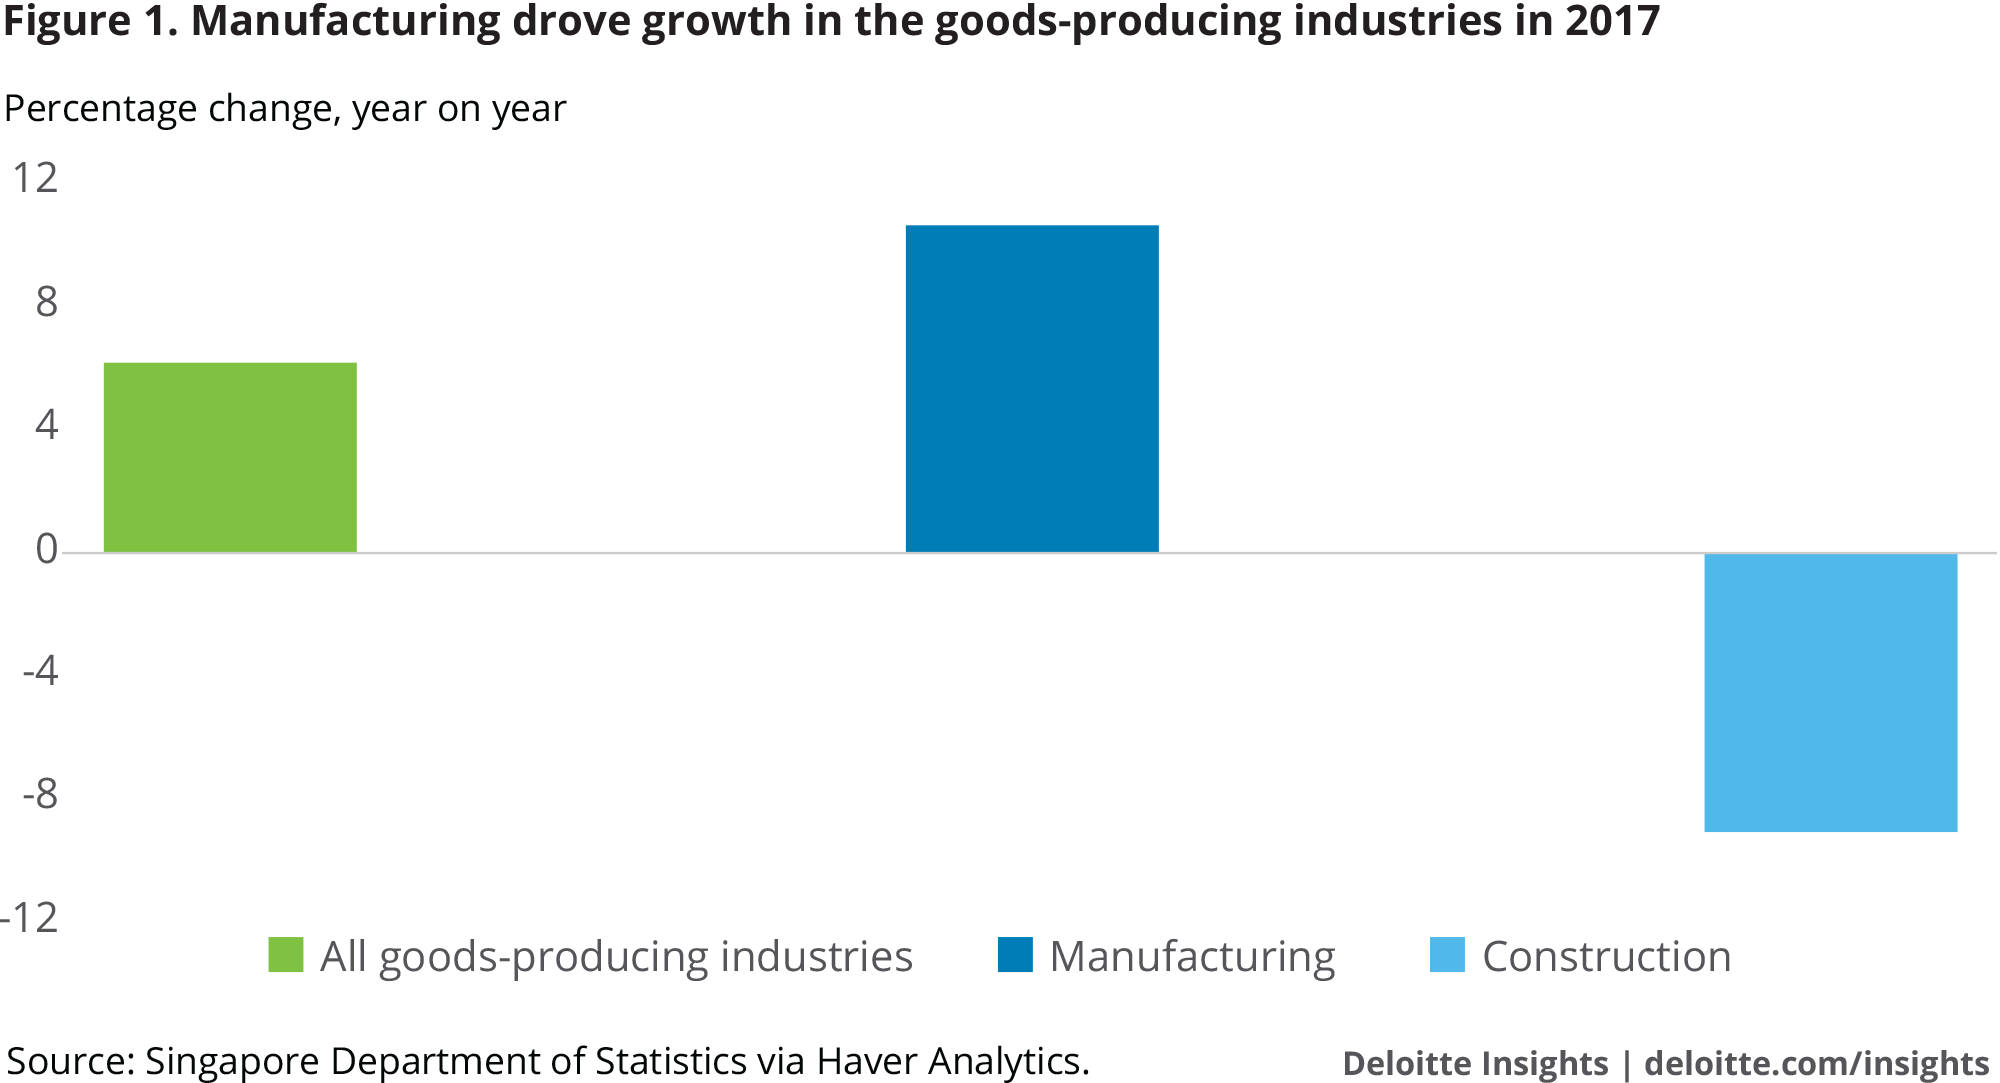 Manufacturing drove growth in the goods-producing industries in 2017